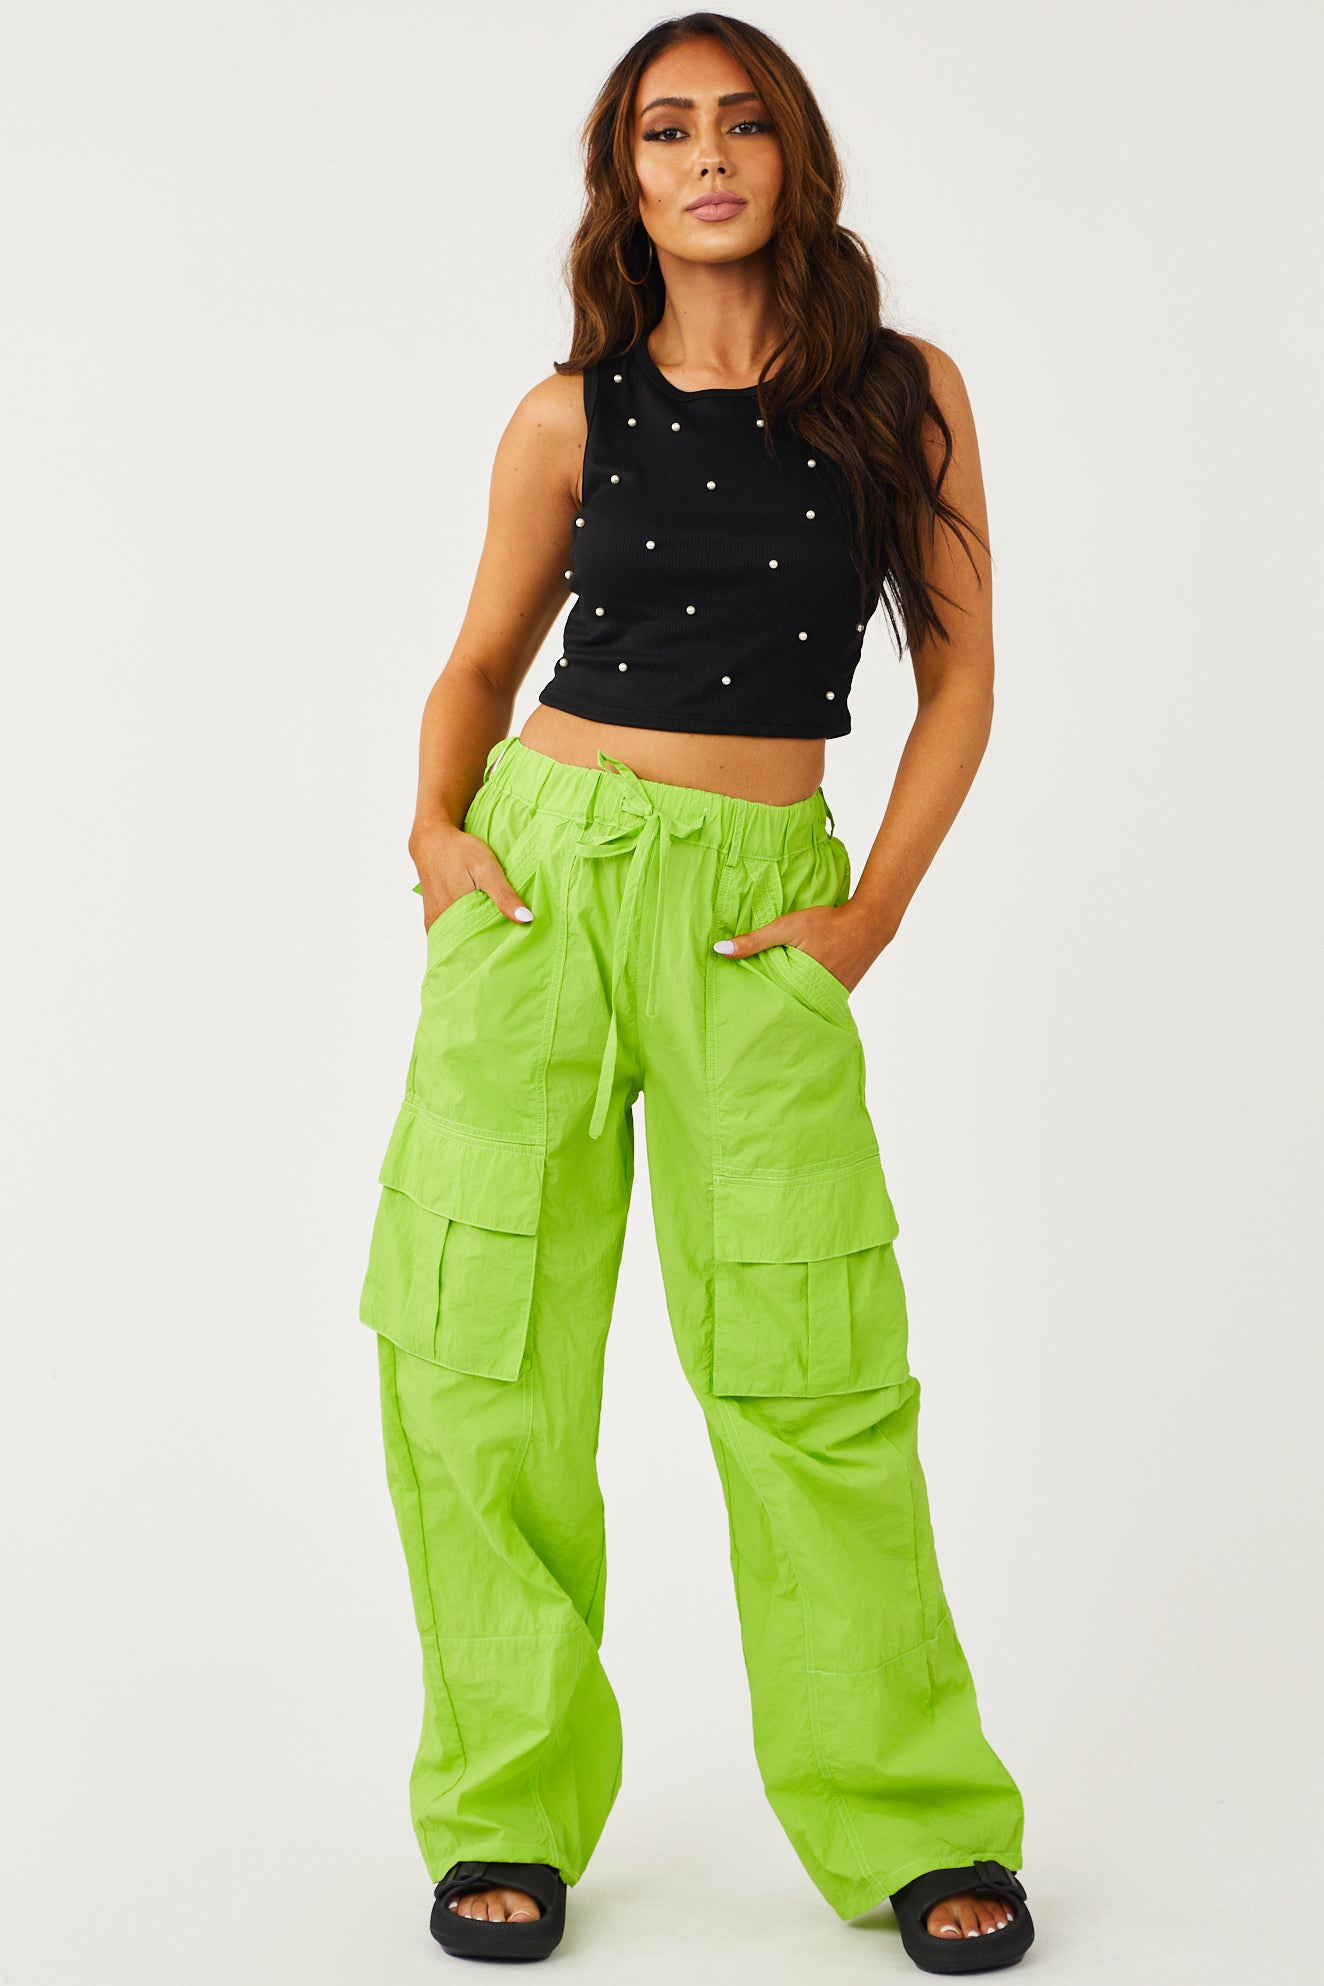 Lime Green Tie-Dye Cargo Pants | Hot Topic